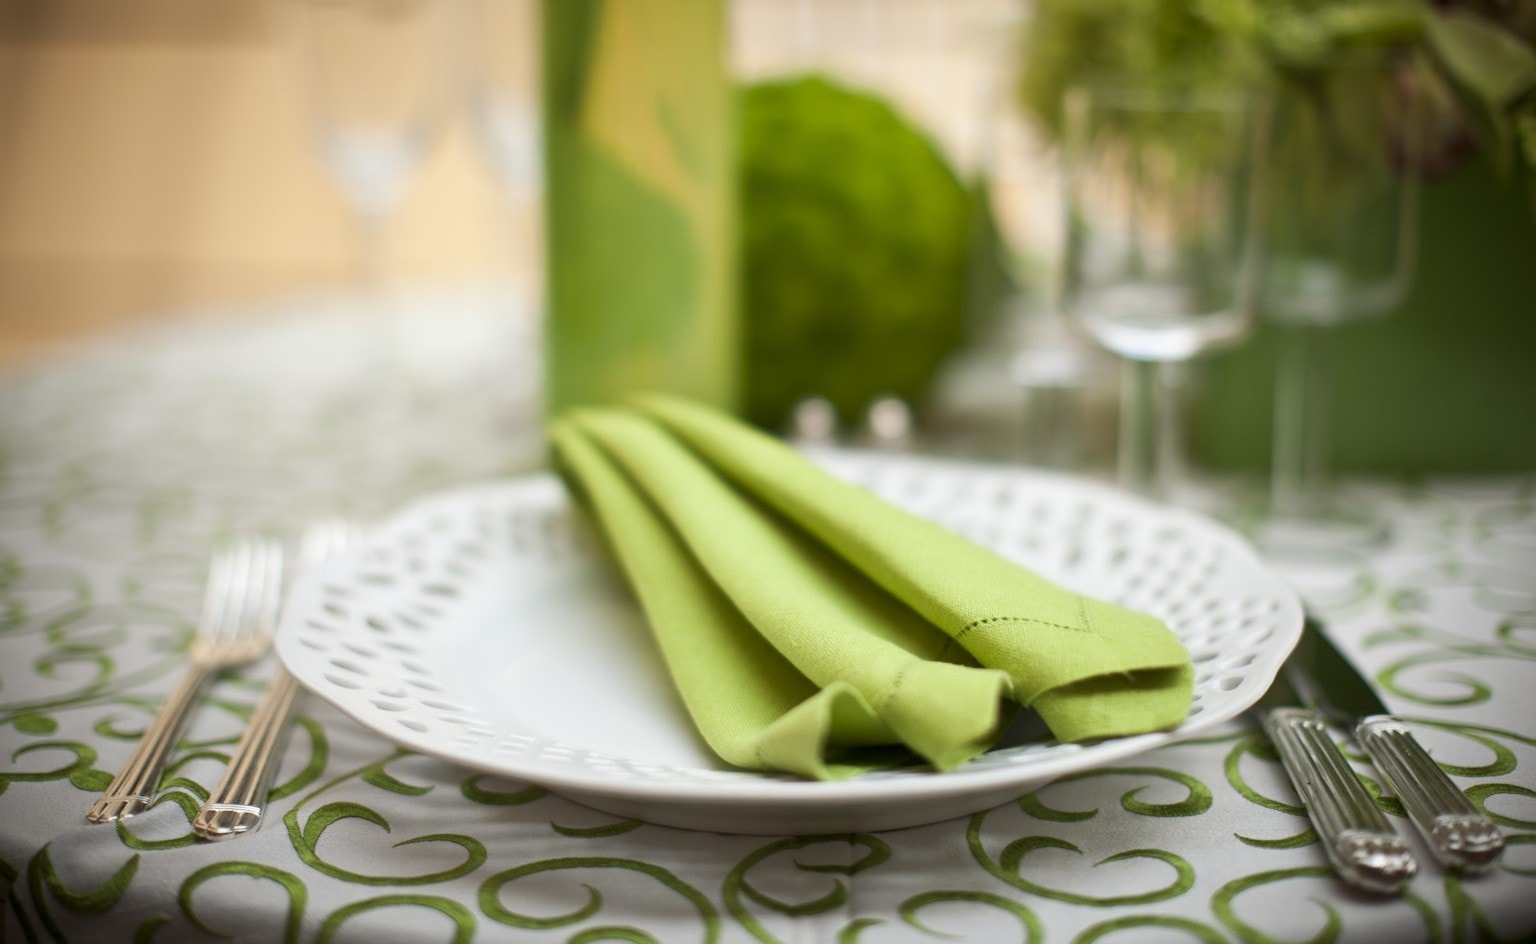 Green Placesetting 